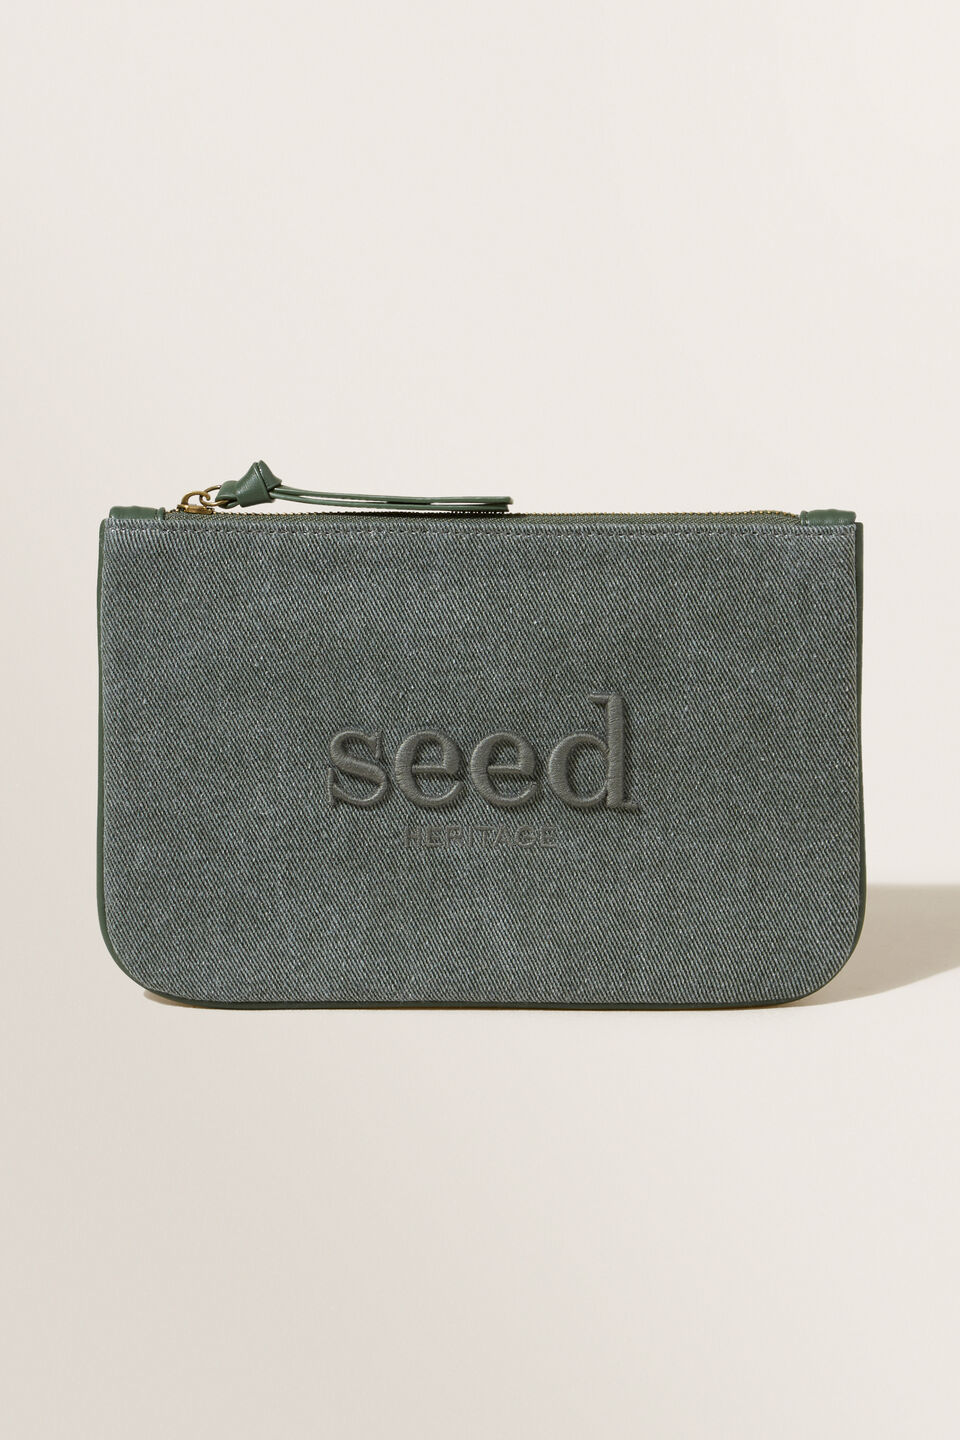 Seed Pouch  Basil